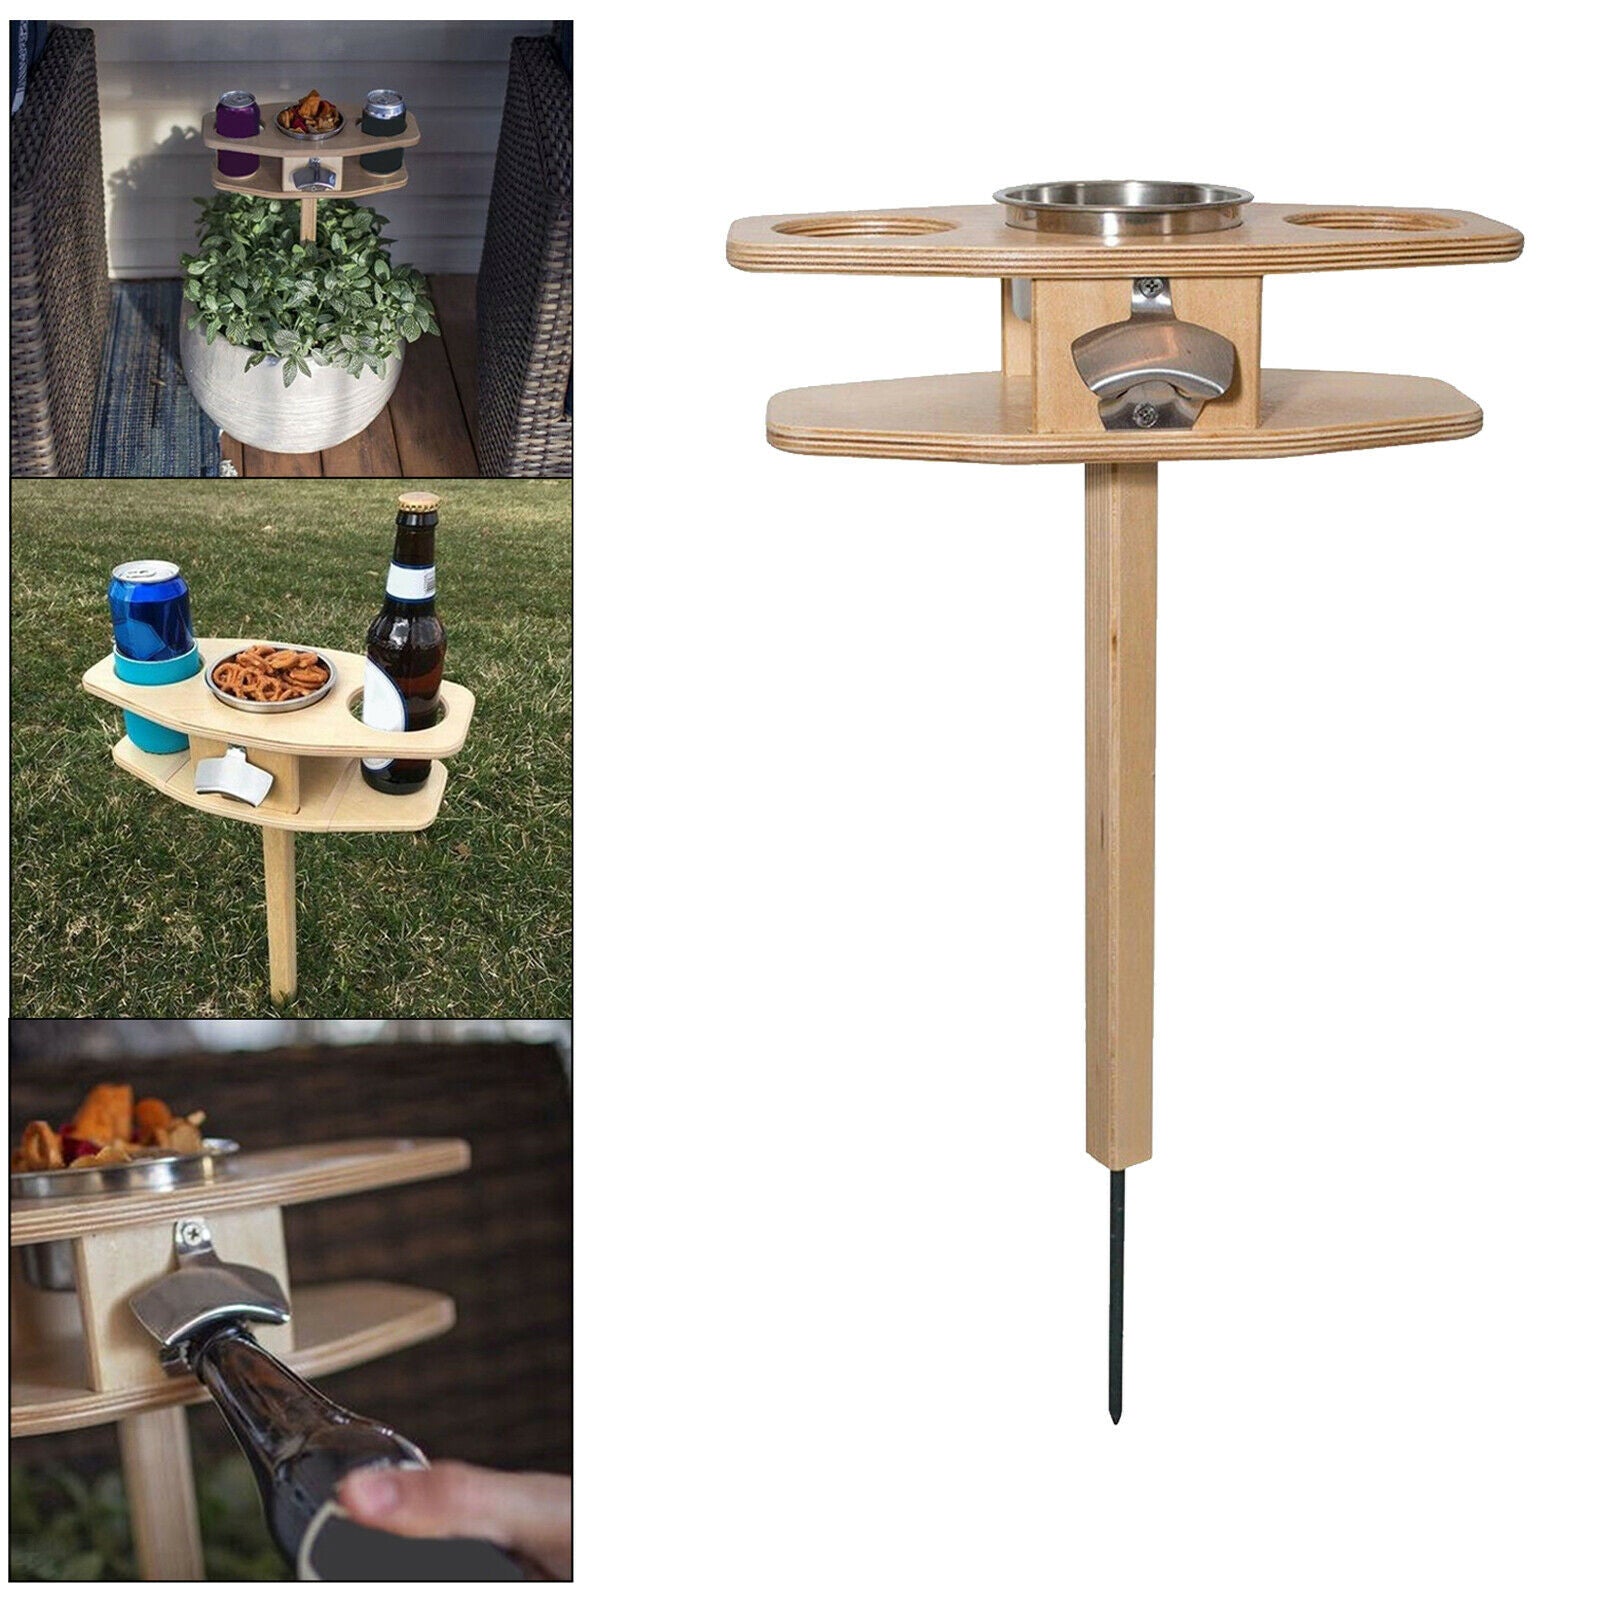 Solid Wooden Wine Table Lawn BBQ Beach Trip Wine Glass Bottles Rack Holders